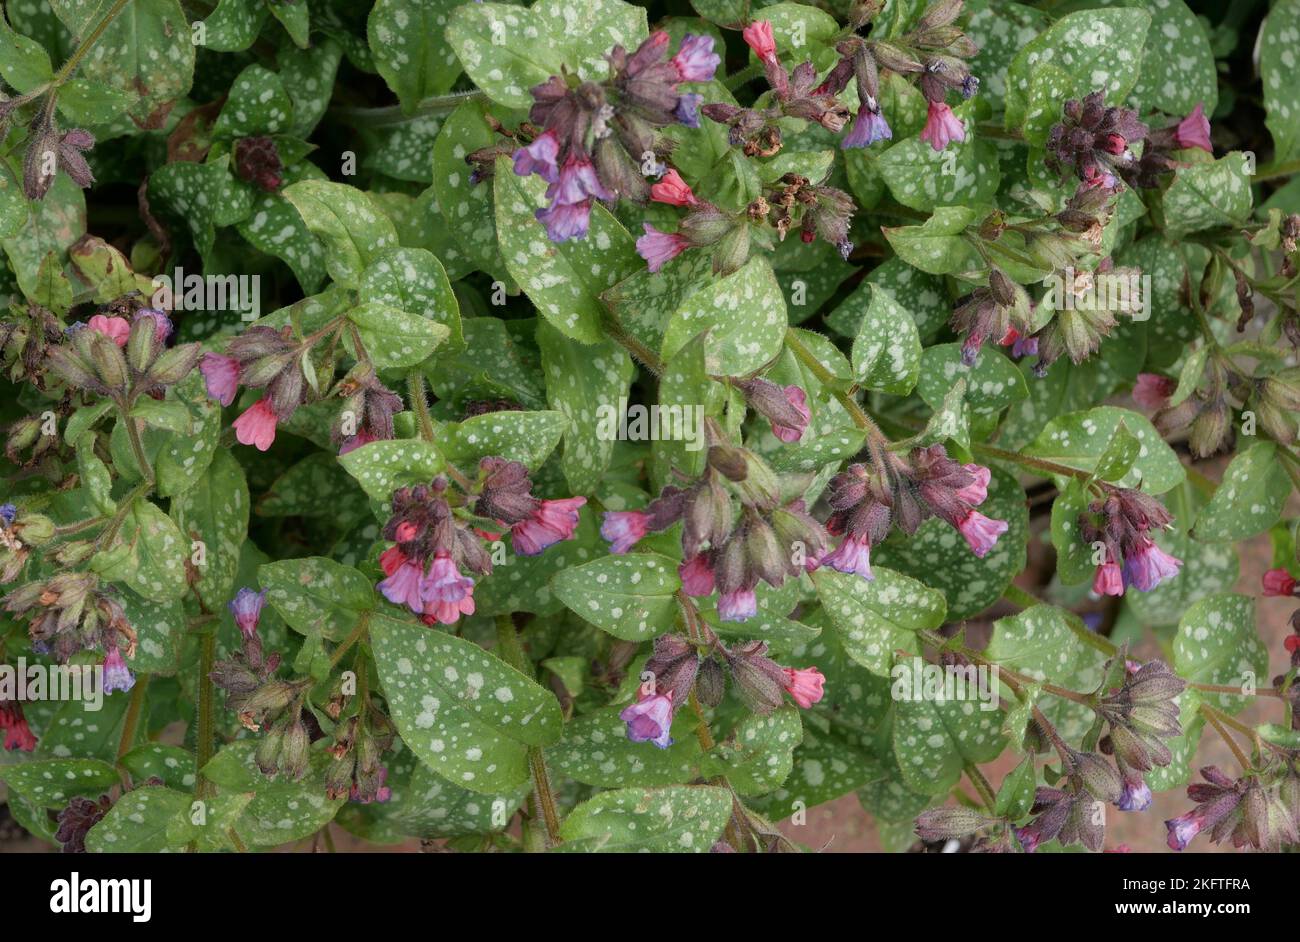 Early spring flowers and spotted leaves of the lungwort or pulmonaria saccharata Stock Photo